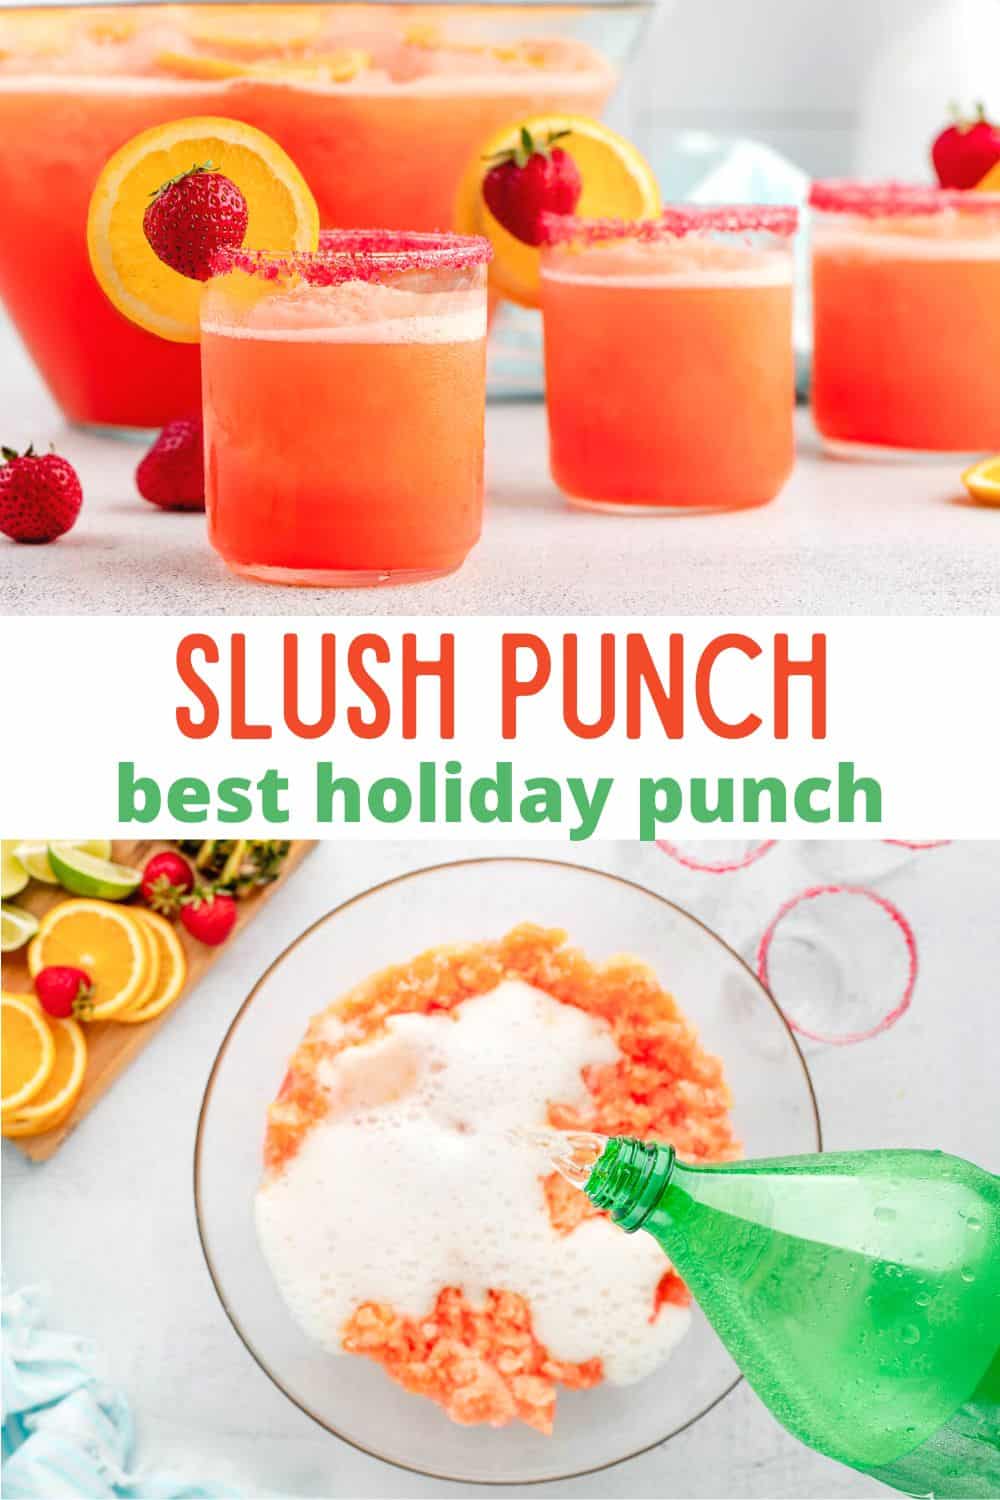 This slushy punch recipe is a crowd favorite. An easy freezer mixture that makes the best party punch for holiday gatherings!